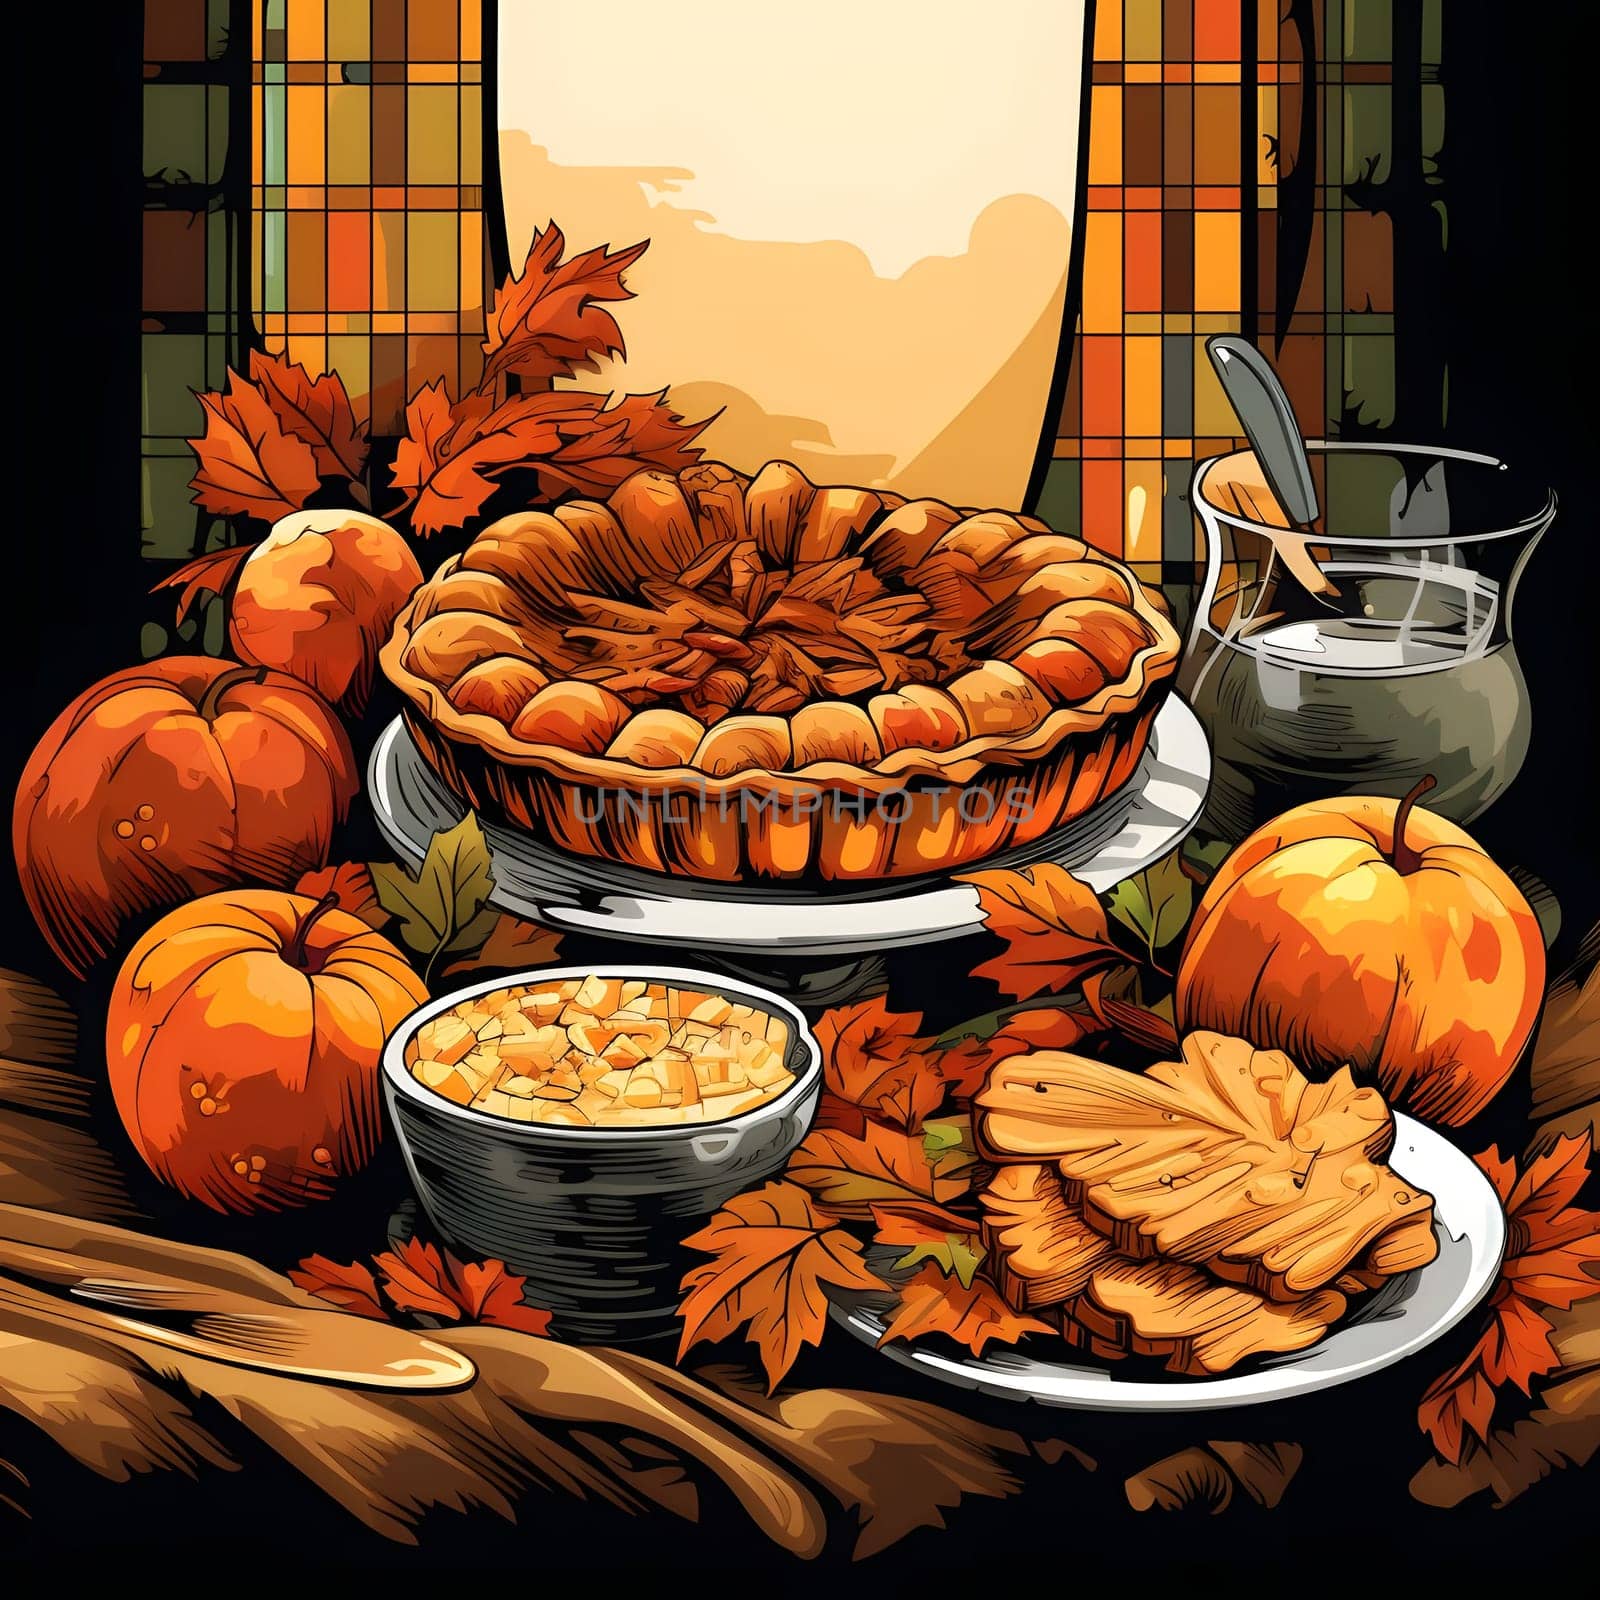 Illustration of pumpkin pie, pumpkins and leaves. Pumpkin as a dish of thanksgiving for the harvest. by ThemesS